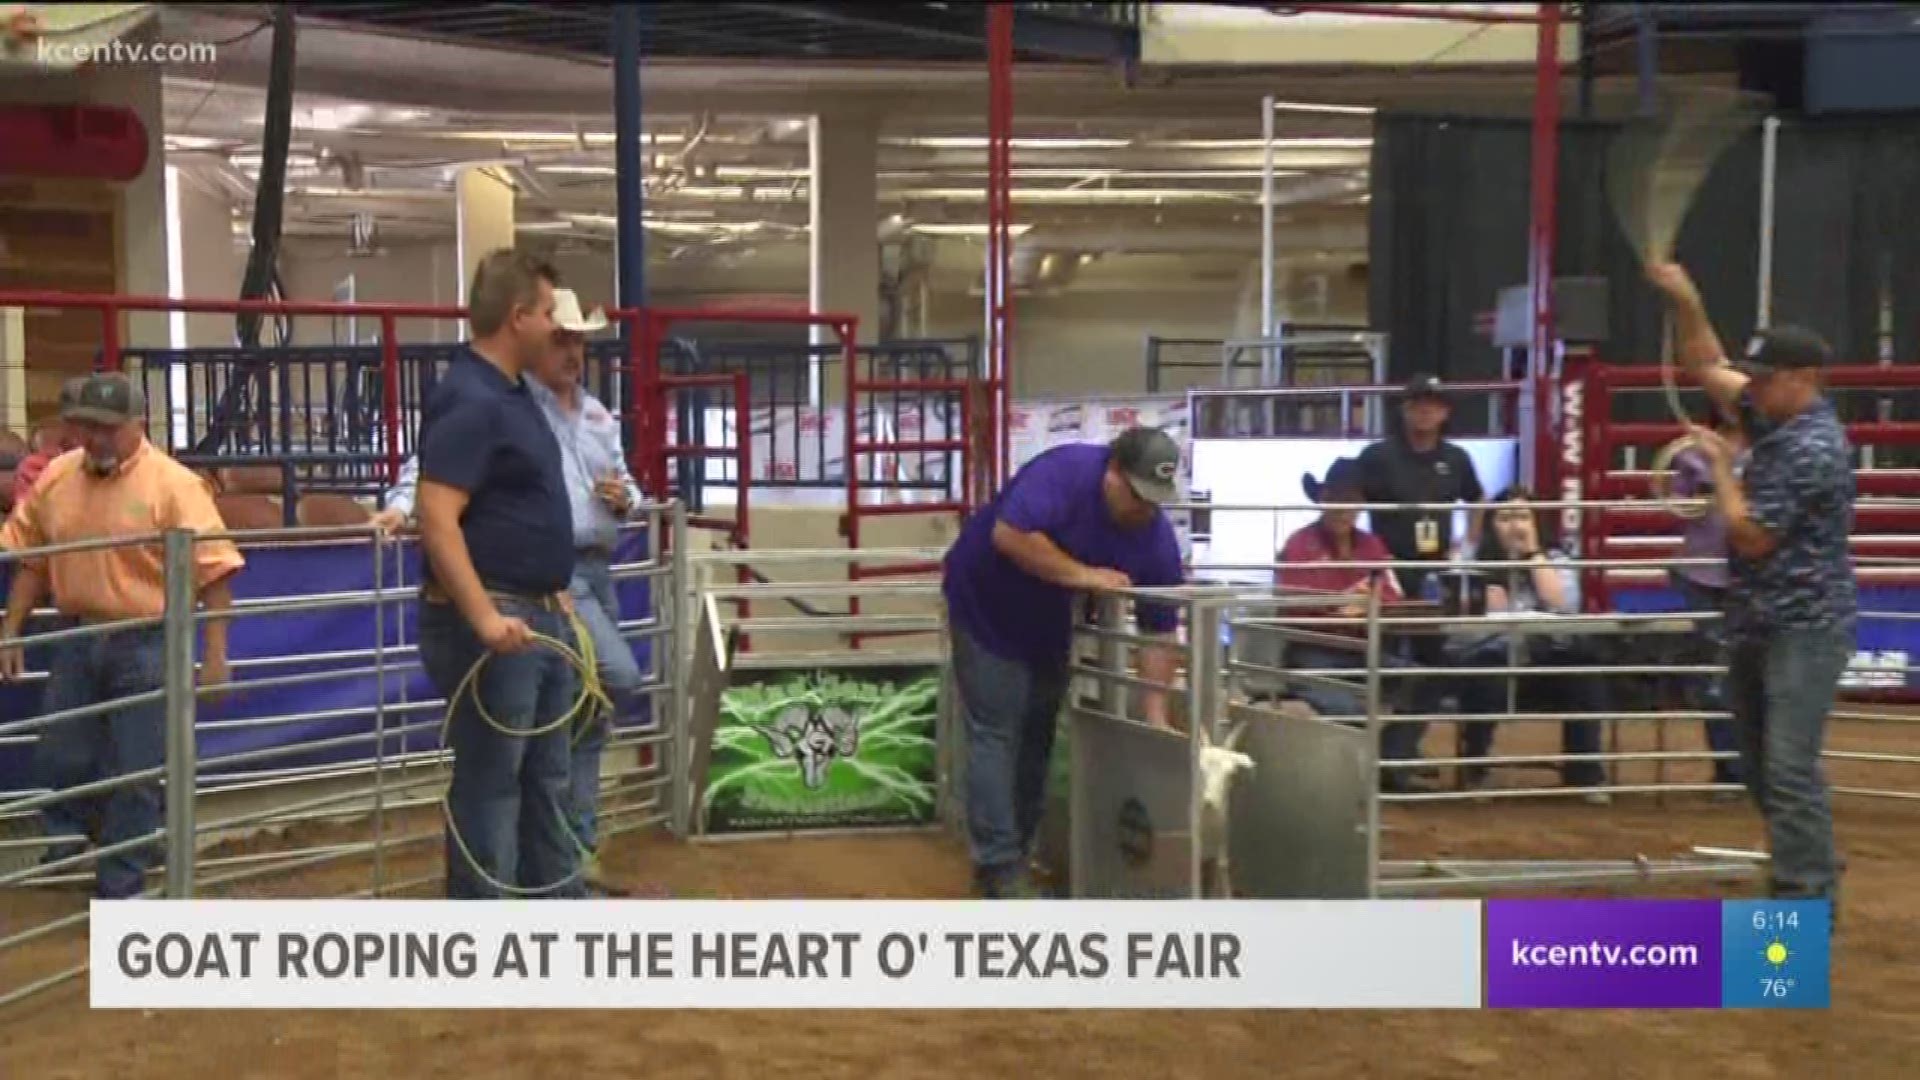 KCEN Channel 6 sports anchors Jessica Morrey and Kurtis Quillin competed Wednesday in the goat roping competition at the Heart 'o Texas Fair.